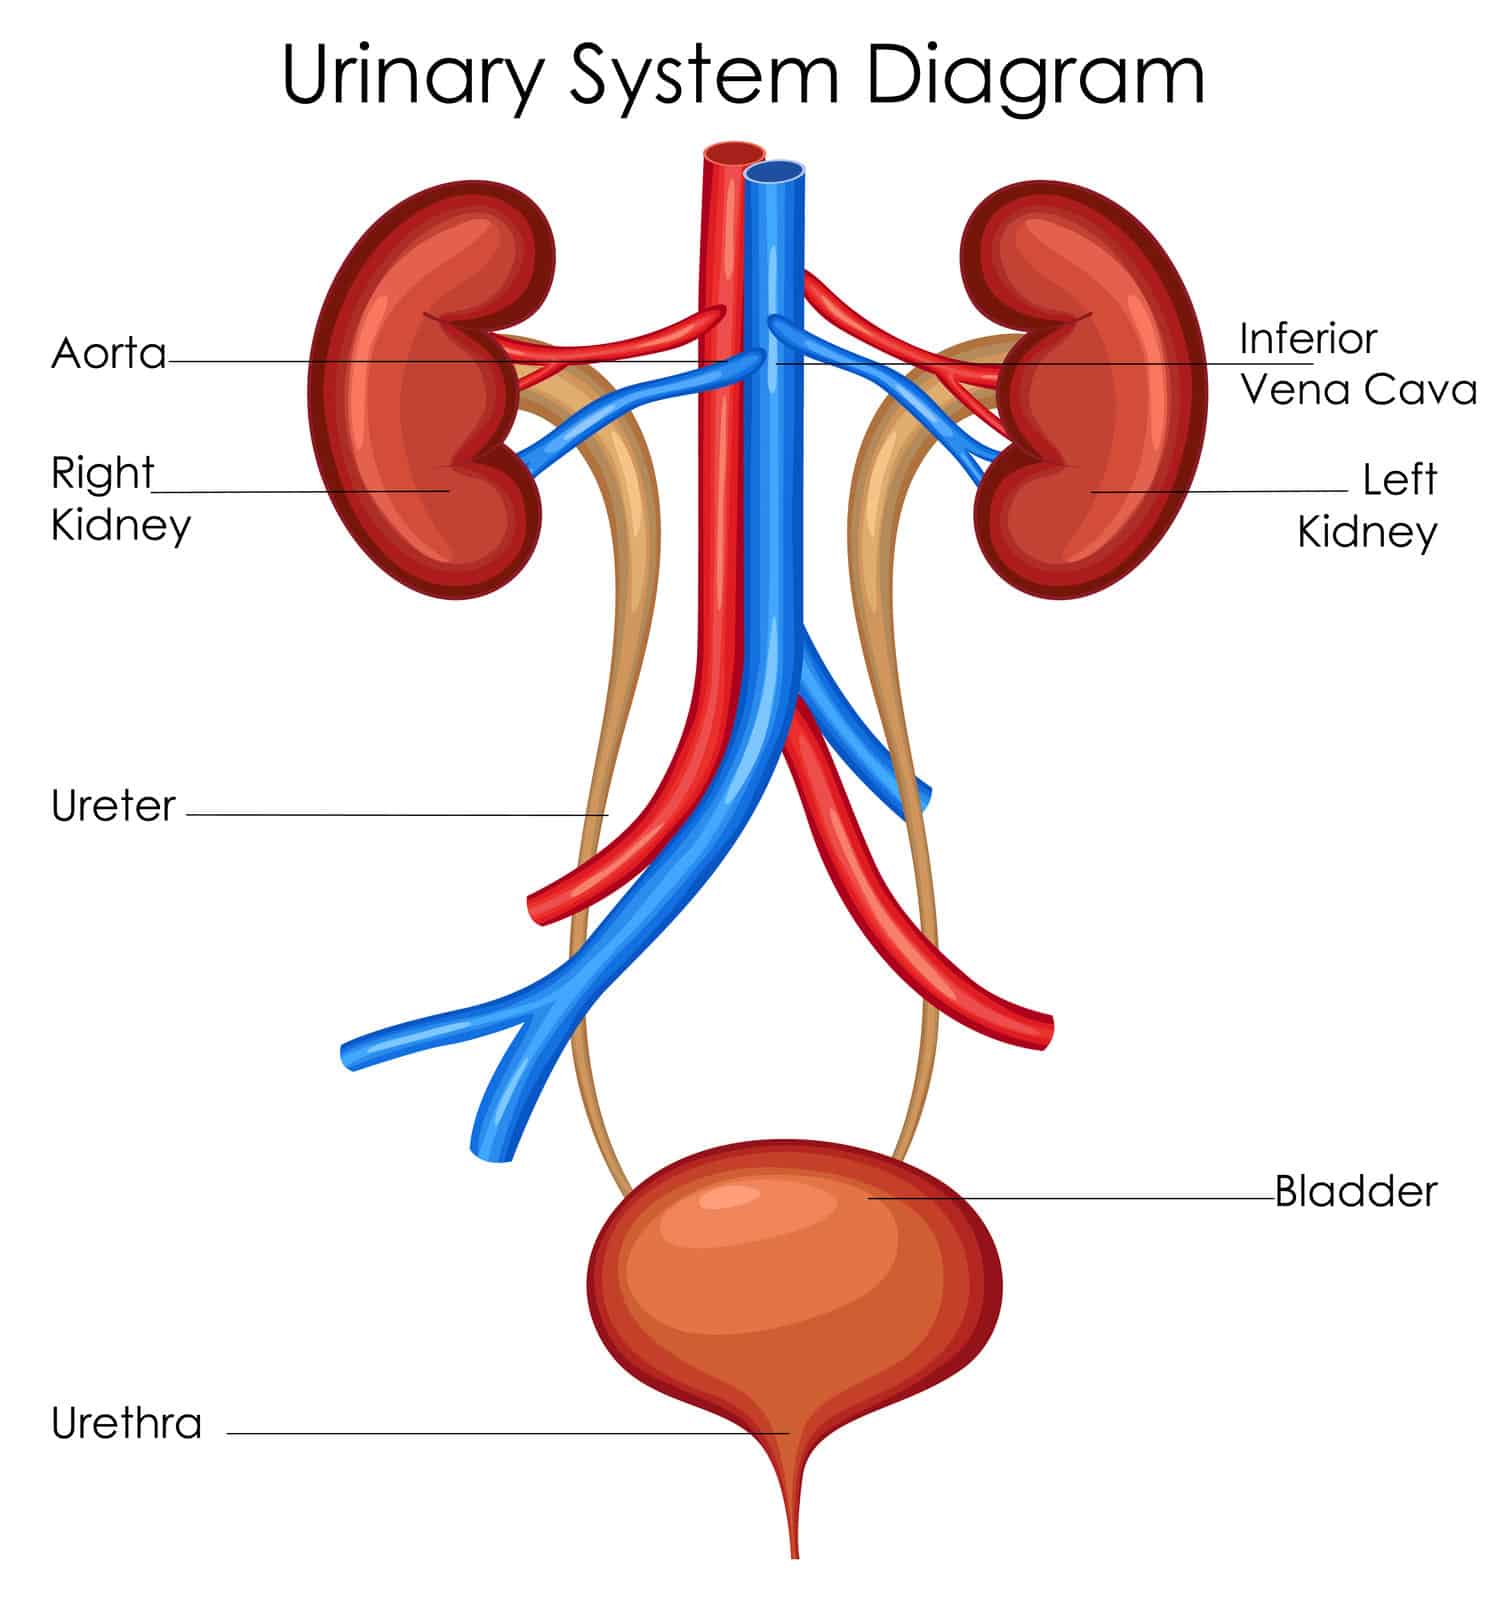 The urinary system.